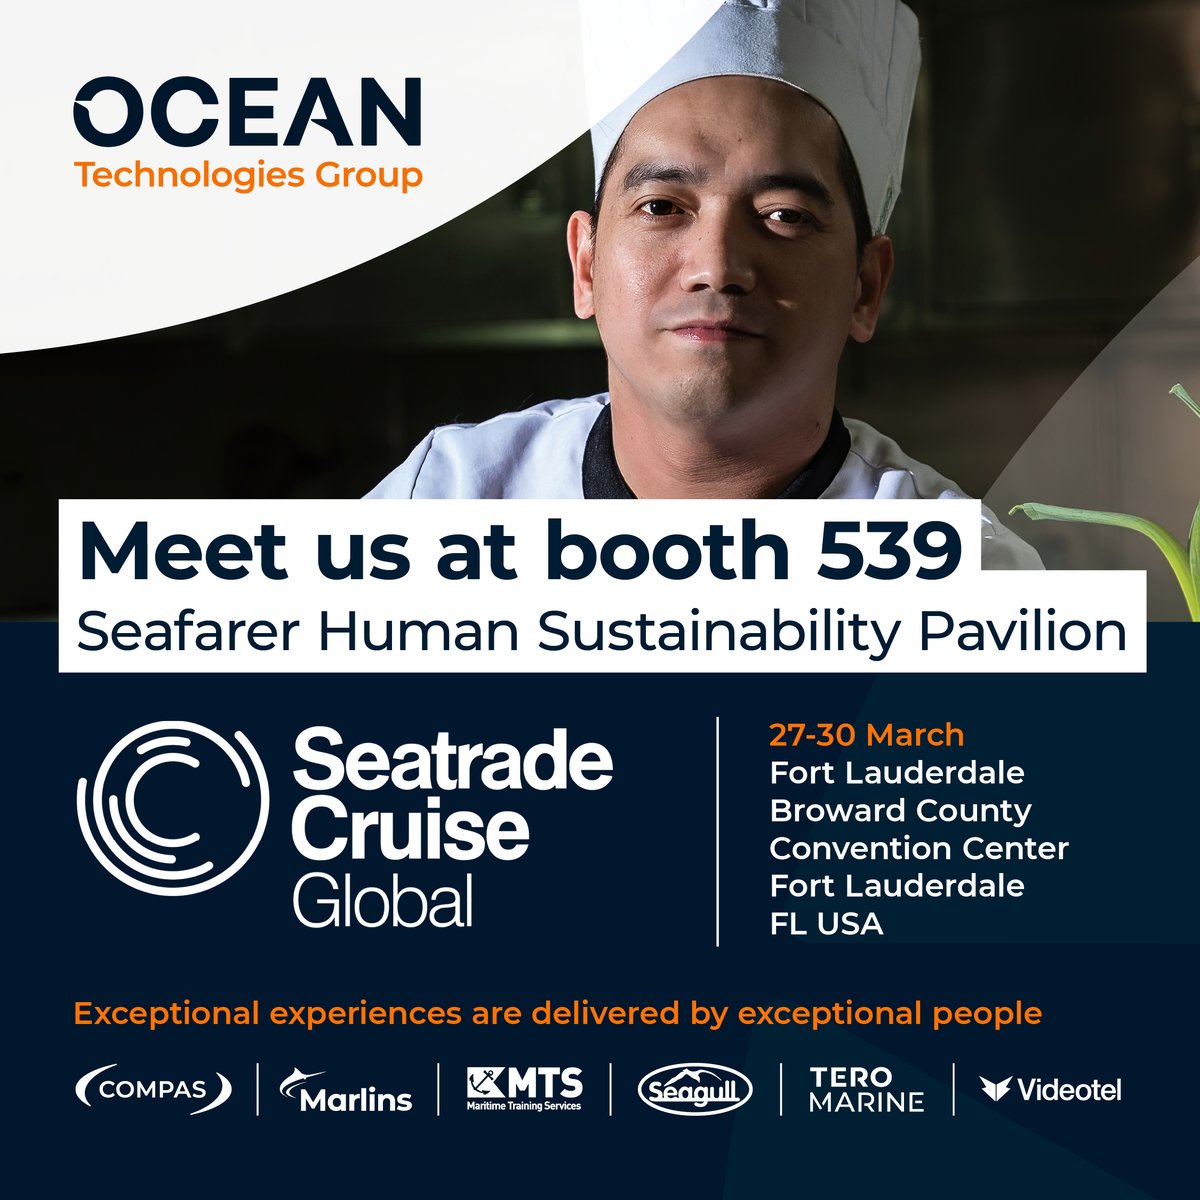 We hope to see you today at Fort Lauderdale for @SeatradeCruise Global at booth 539! 

OTG's Joost van Ree & Catherine Logie look forward to discussing how best to support the industry with cruise specific and industry changing content.
#wearecruise #MaritimeTraining #hospitality